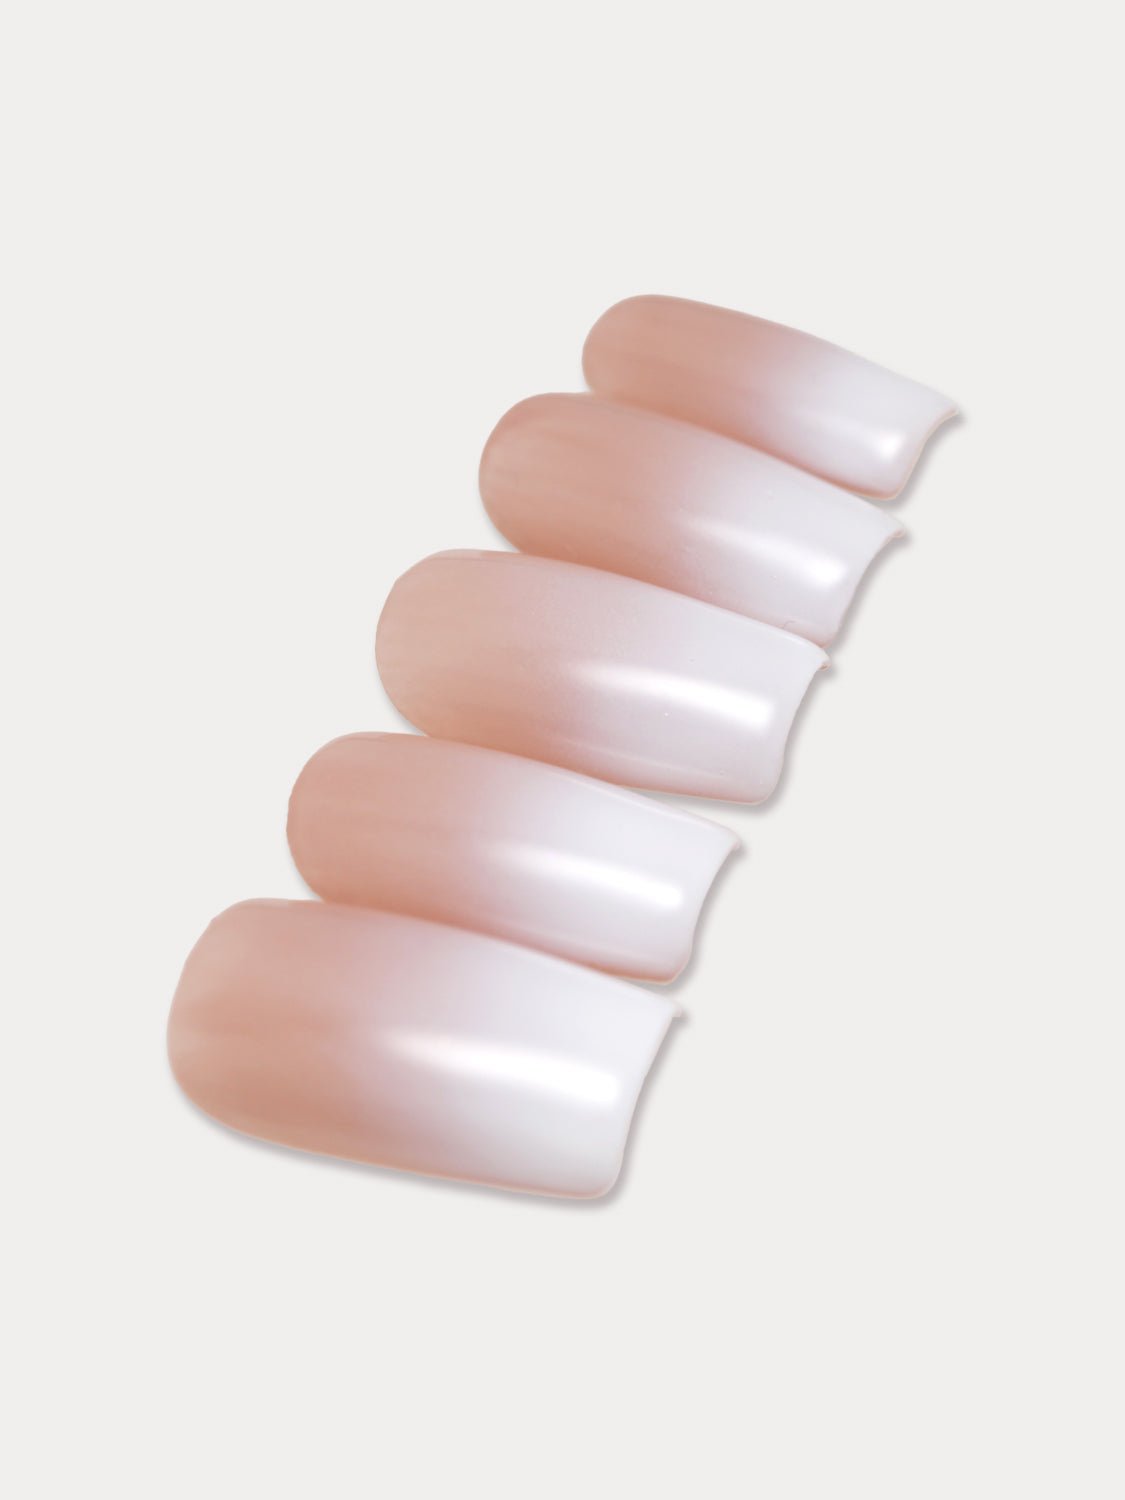 MIEAP Classic White Ombre press on nail set is an essential and timeless design that every nail enthusiast should have. It’s suitable for various occasions and pairs well with any outfit. Whether you're attending a summer event or a graduation ceremony, these nails will complement your look effortlessly. #MIEAP #MIEAPnails #pressonnail #falsenail #acrylicnail #nails #nailart #naildesign #nailinspo #handmadenail #summernail #nail2023 #graduationnail #classicnail #squarenail #shortnail #ombrenail